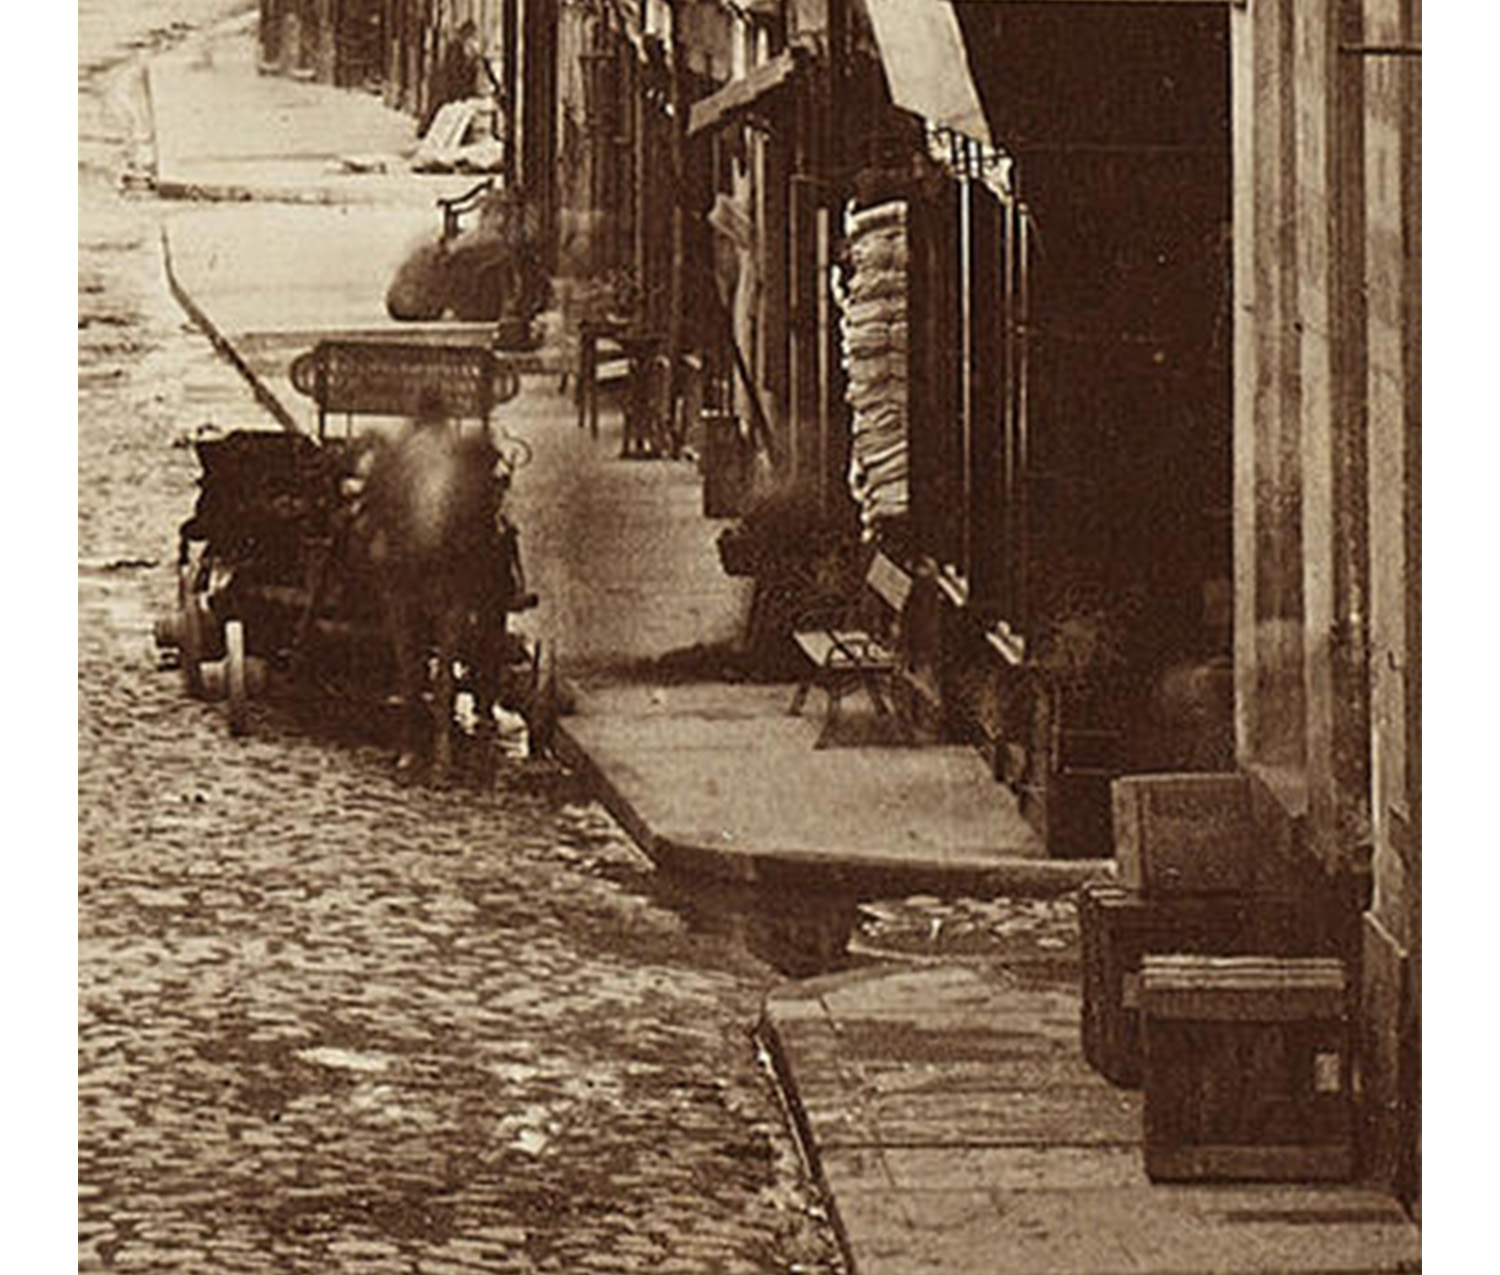 detail of a cart on a cobblestone street, pulled by a blurry horse in motion